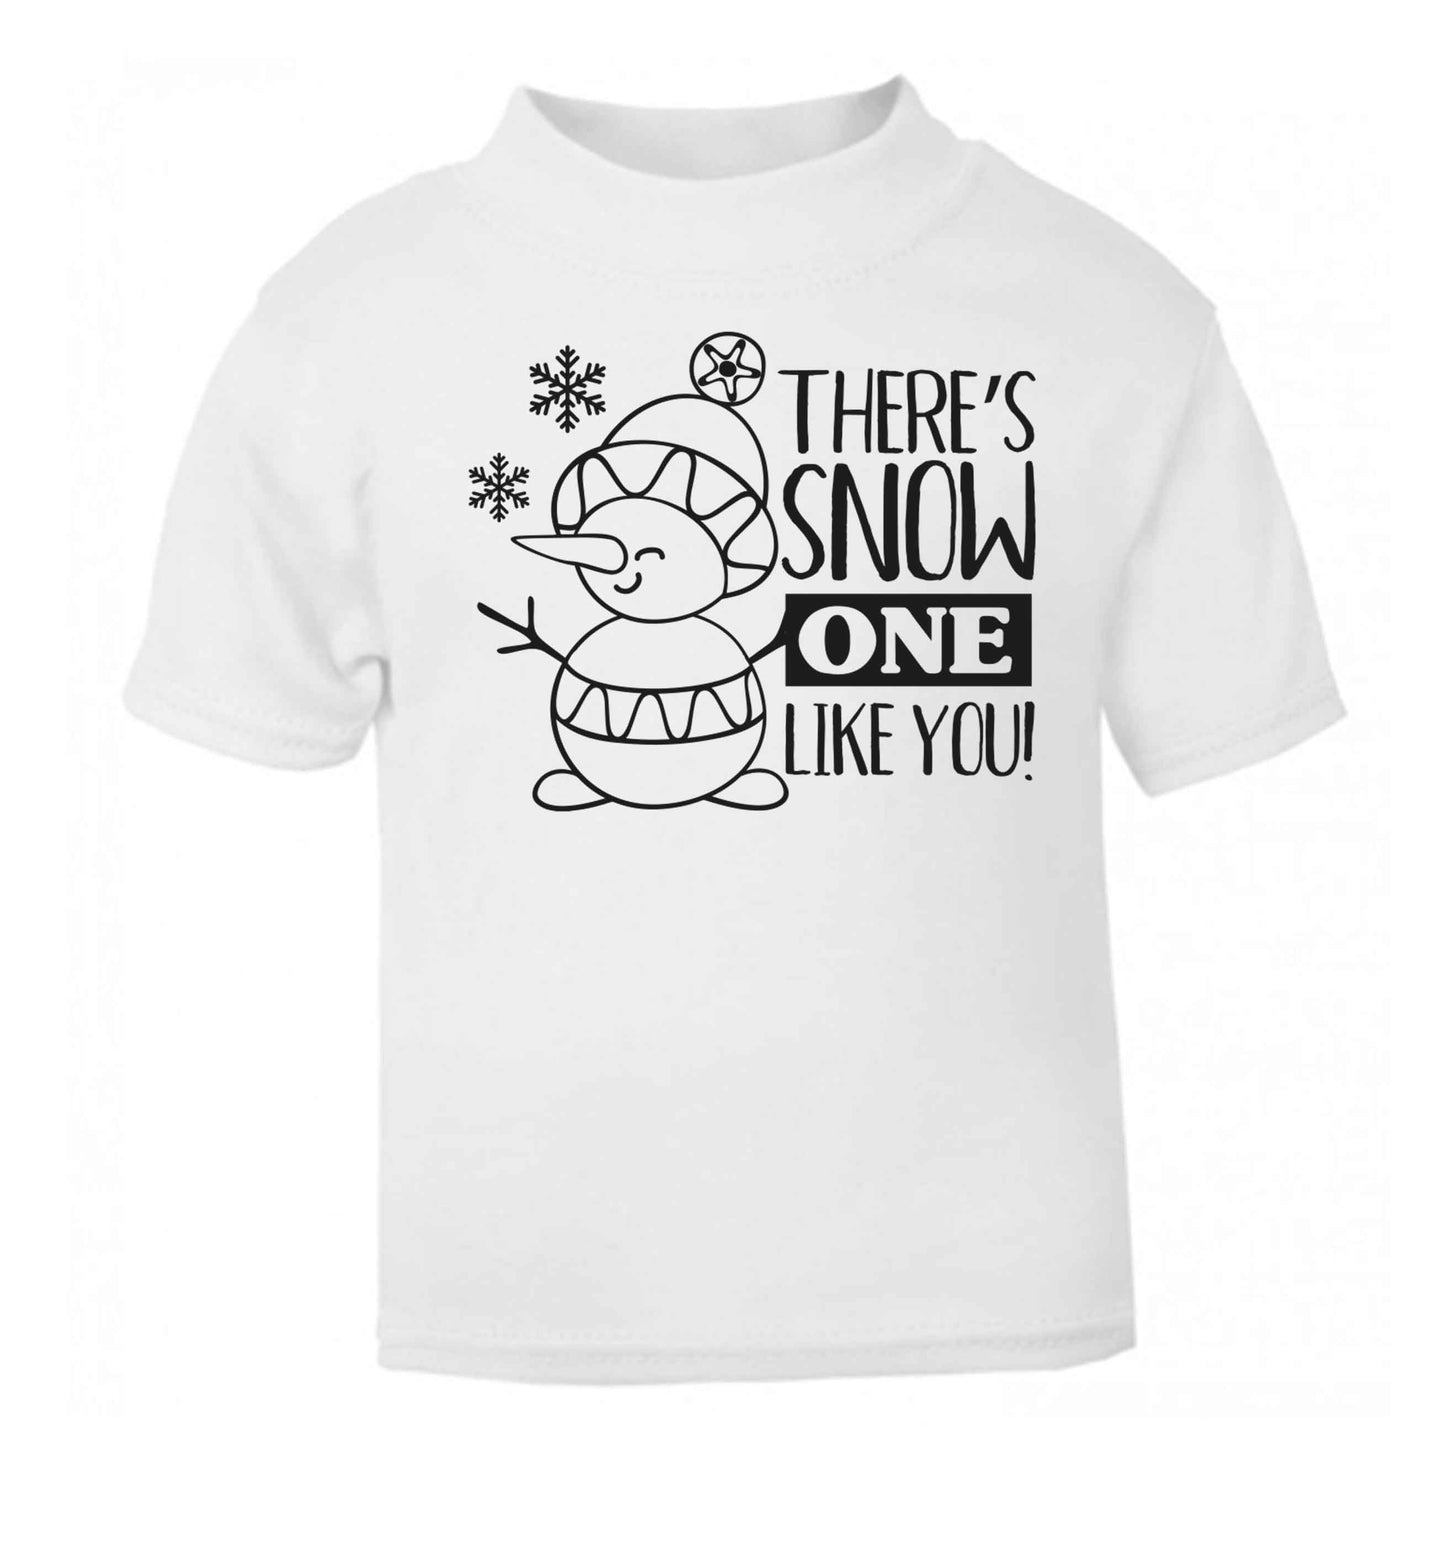 There's snow one like you white baby toddler Tshirt 2 Years